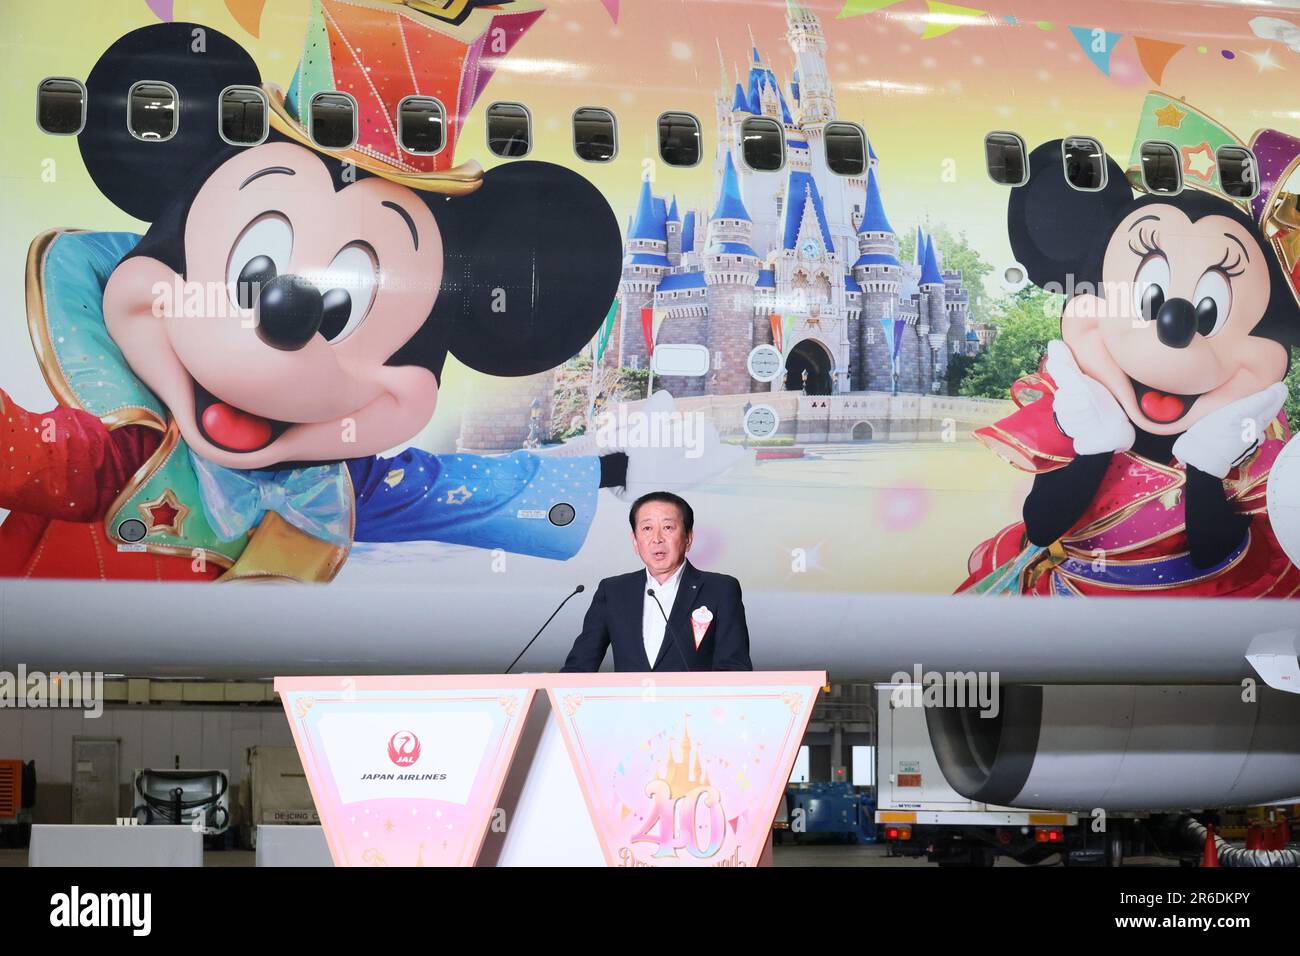 Tokyo, Japan. 9th June, 2023. Tokyo Disney Resort operator Oriental Land president Kenji Yoshida delivers a speech as Oriental Land and Japan Airlines (JAL) display the 'JAL Colorful Dreams Express' jetliner to celebrate the Disneyland's 40th anniversary at a JAL hangar at the Haneda airport in Tokyo on Friday, June 9, 2023. The new Disney characters designed Boeing 767 launched JAL's domestic routes. (photo by Yoshio Tsunoda/AFLO) Stock Photo